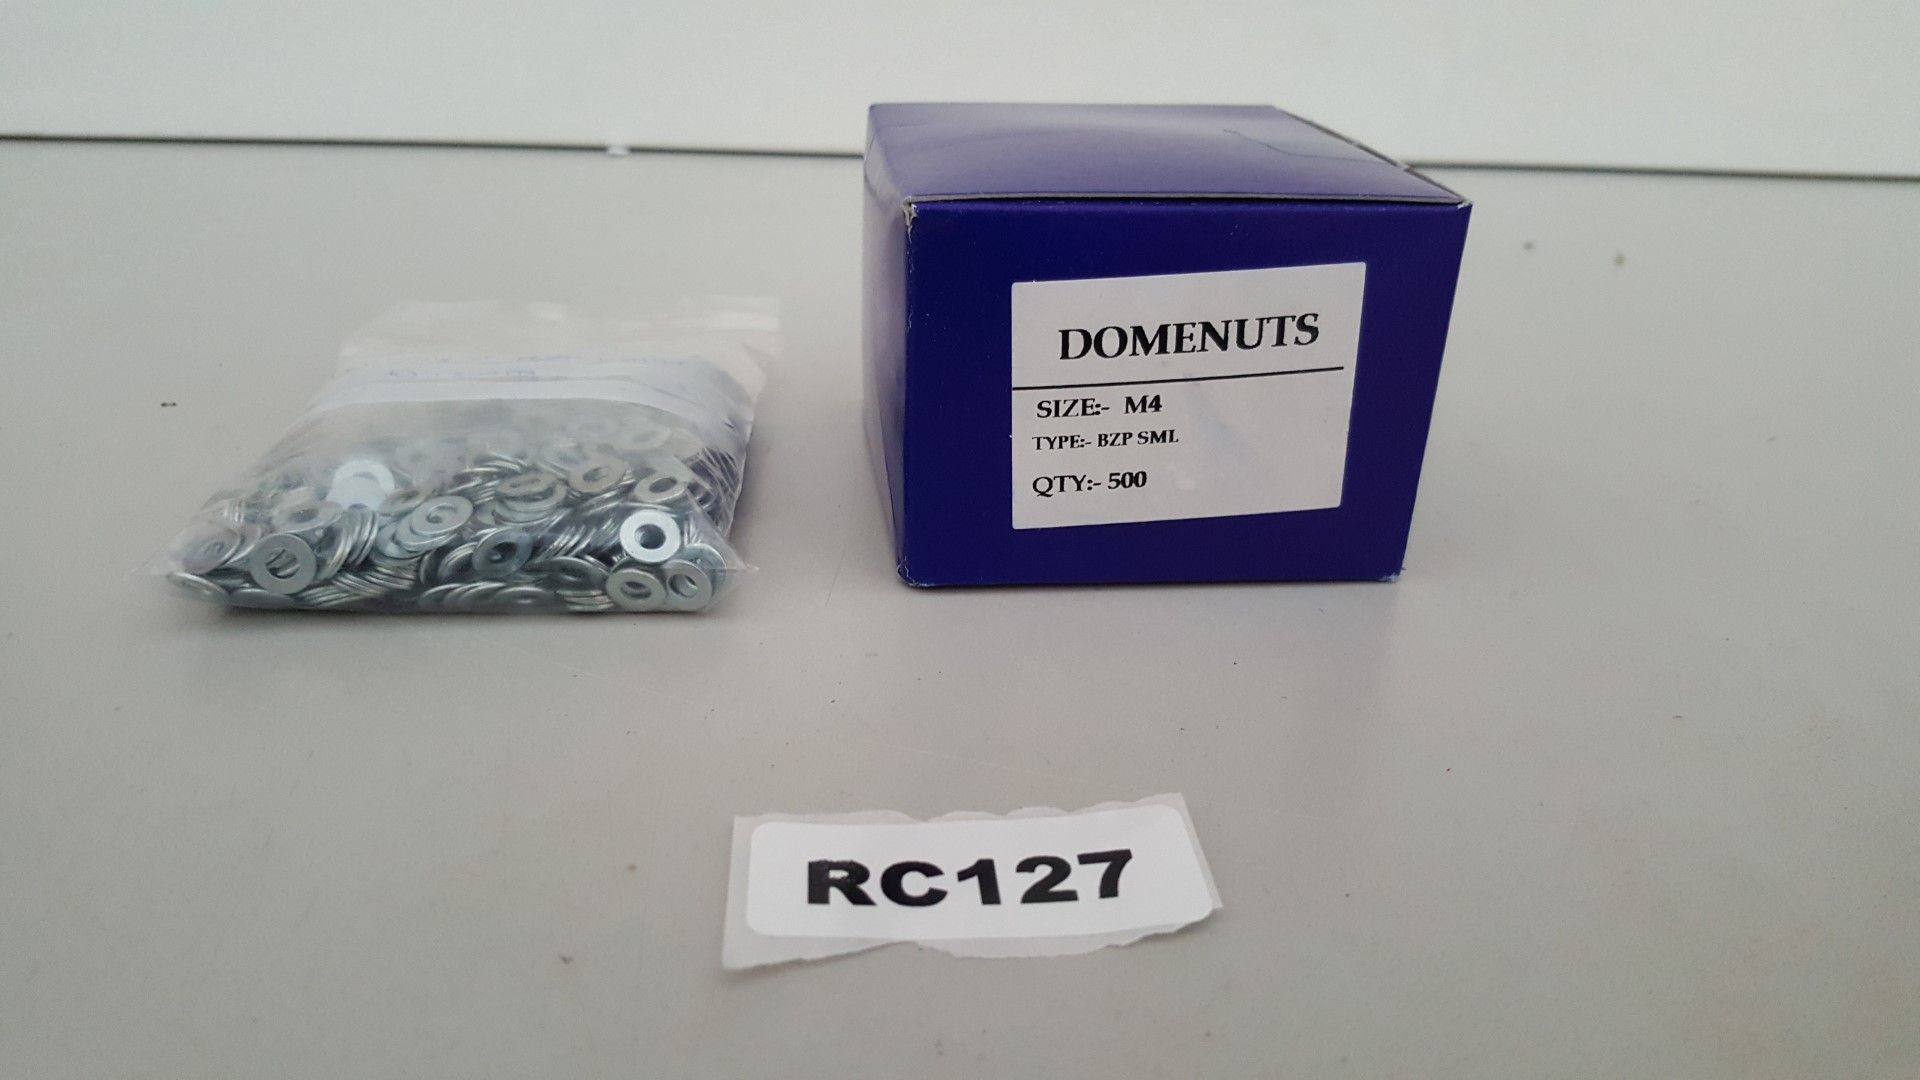 1 x Domenuts M4 Approximately 500 And FLAT WASHERS M4 Approximately 500 - Ref RC127 - CL011 - Locat